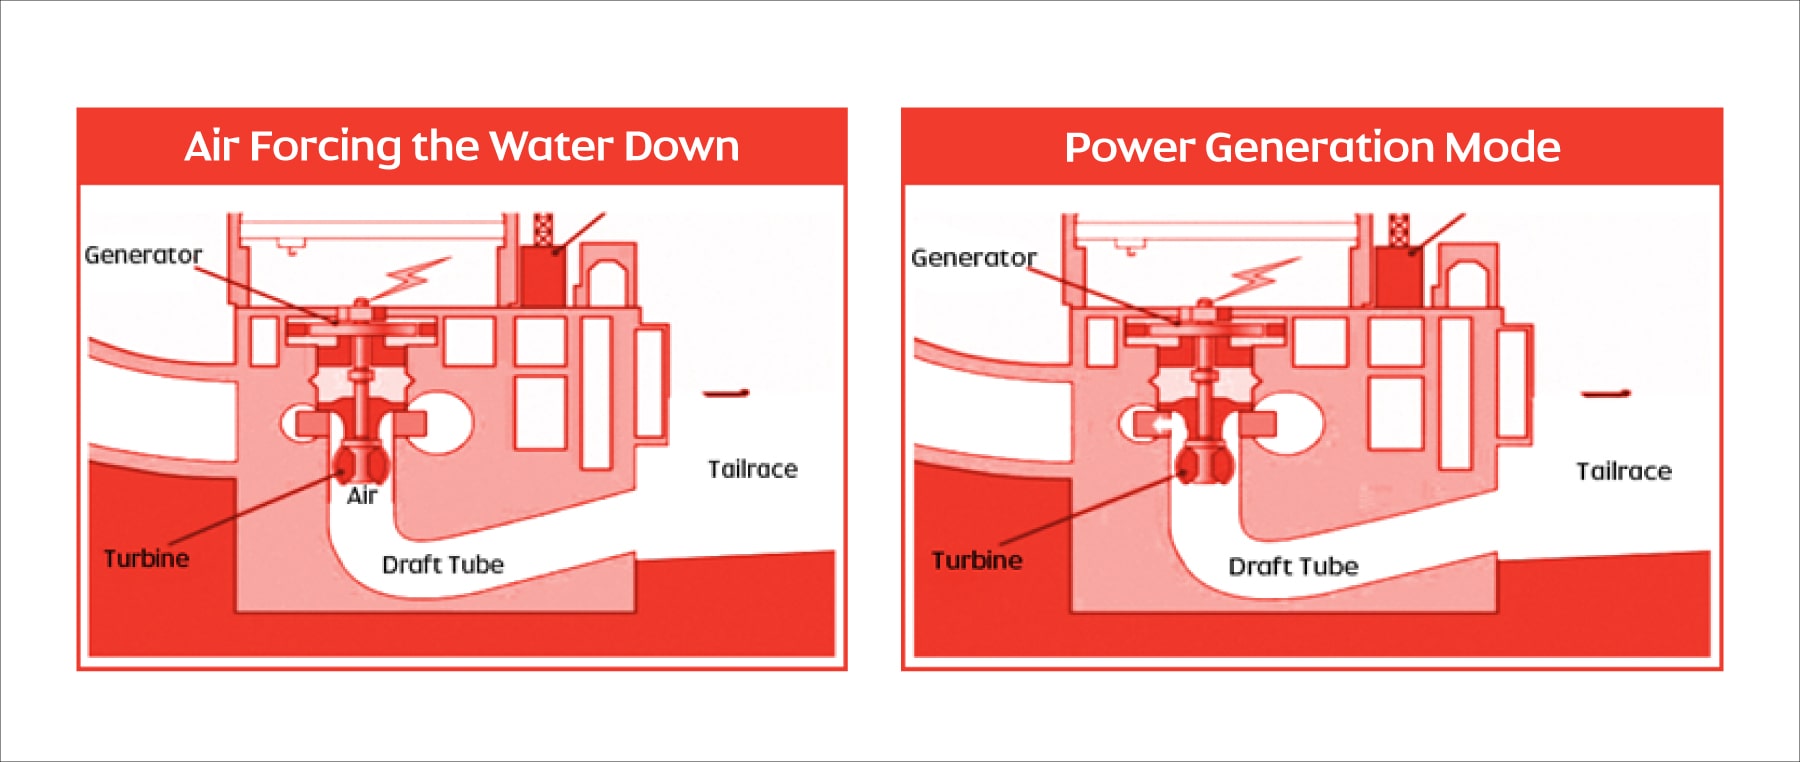 Air forcing the water down - Power generation mode